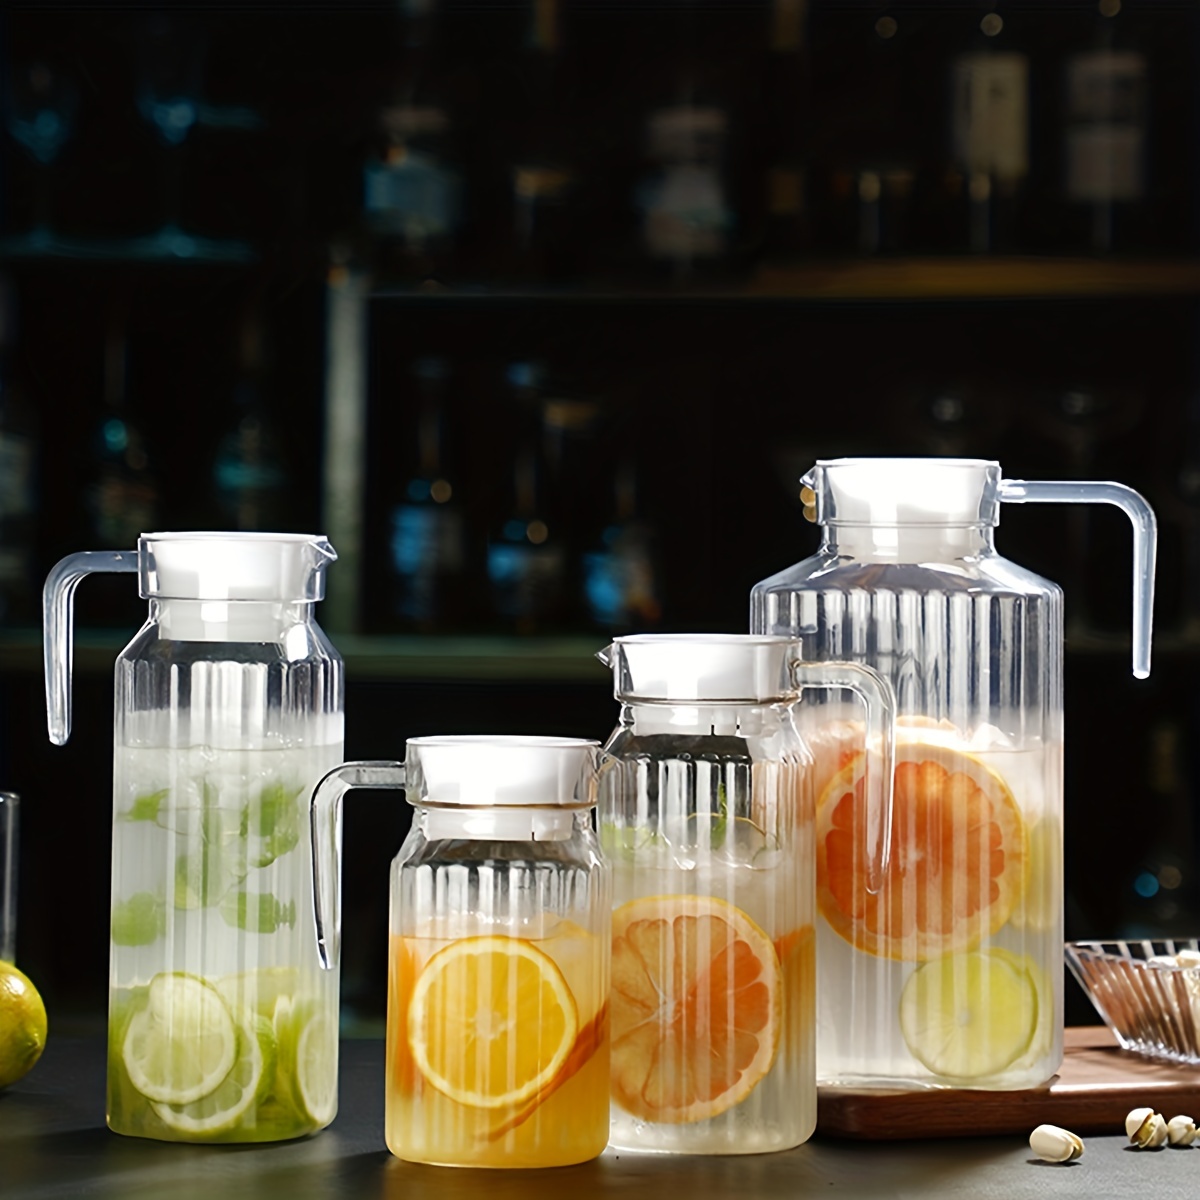 Glass Carafe Pitcher - 34oz Water Carafe Set for Mimosa Bar - Juice Containers with Airtight Lids for Fridge, 3 Pack Tea Pitcher for Juice, Milk, Cold